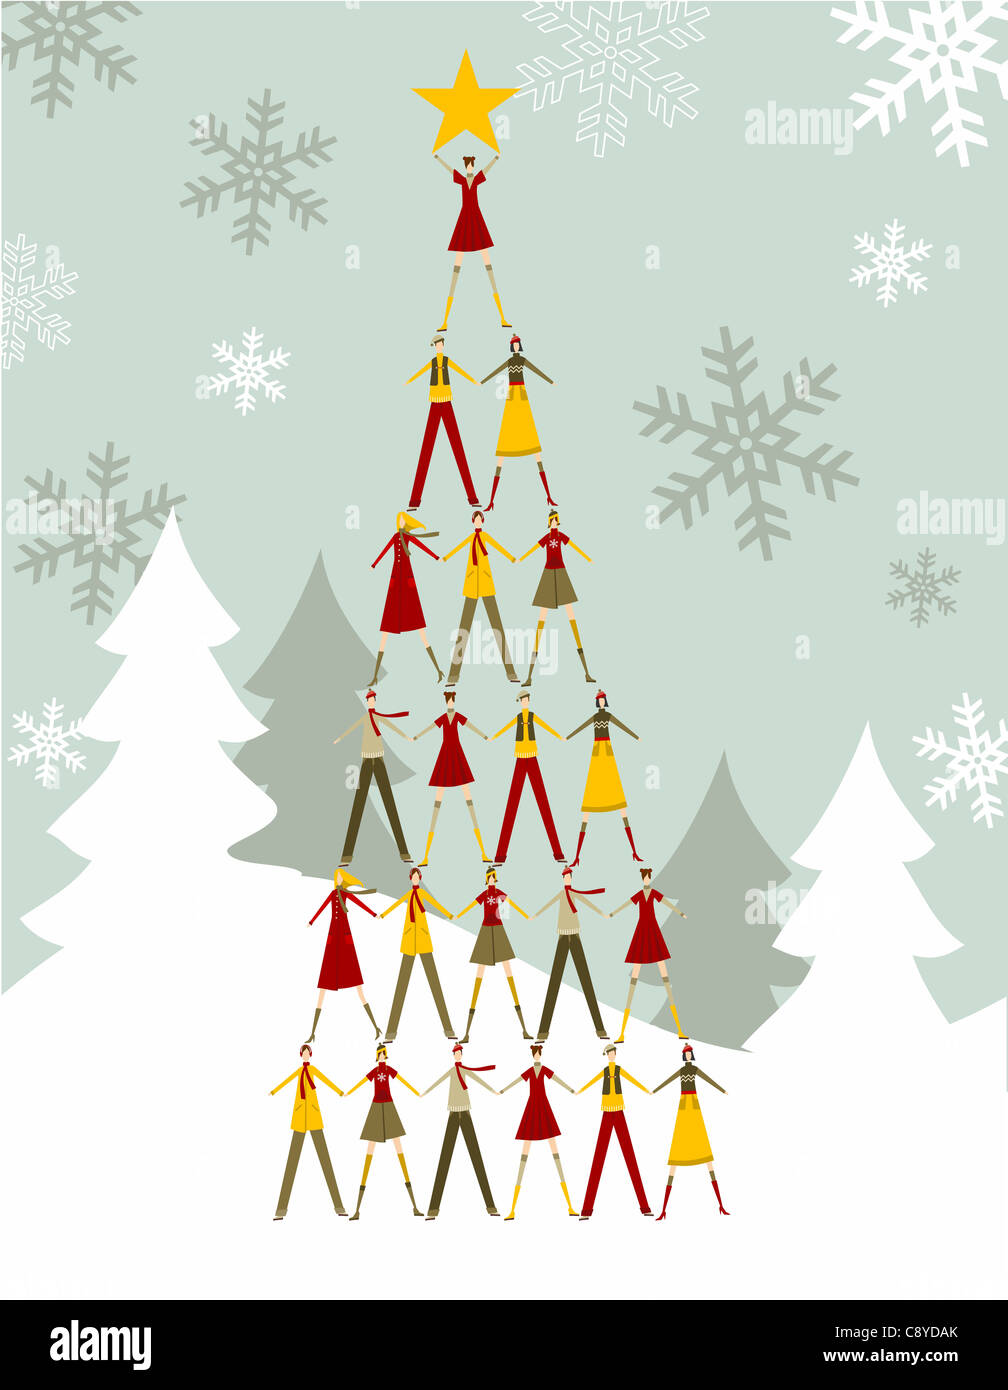 https://c8.alamy.com/comp/C8YDAK/christmas-tree-made-of-people-with-a-yellow-star-on-the-top-over-a-C8YDAK.jpg